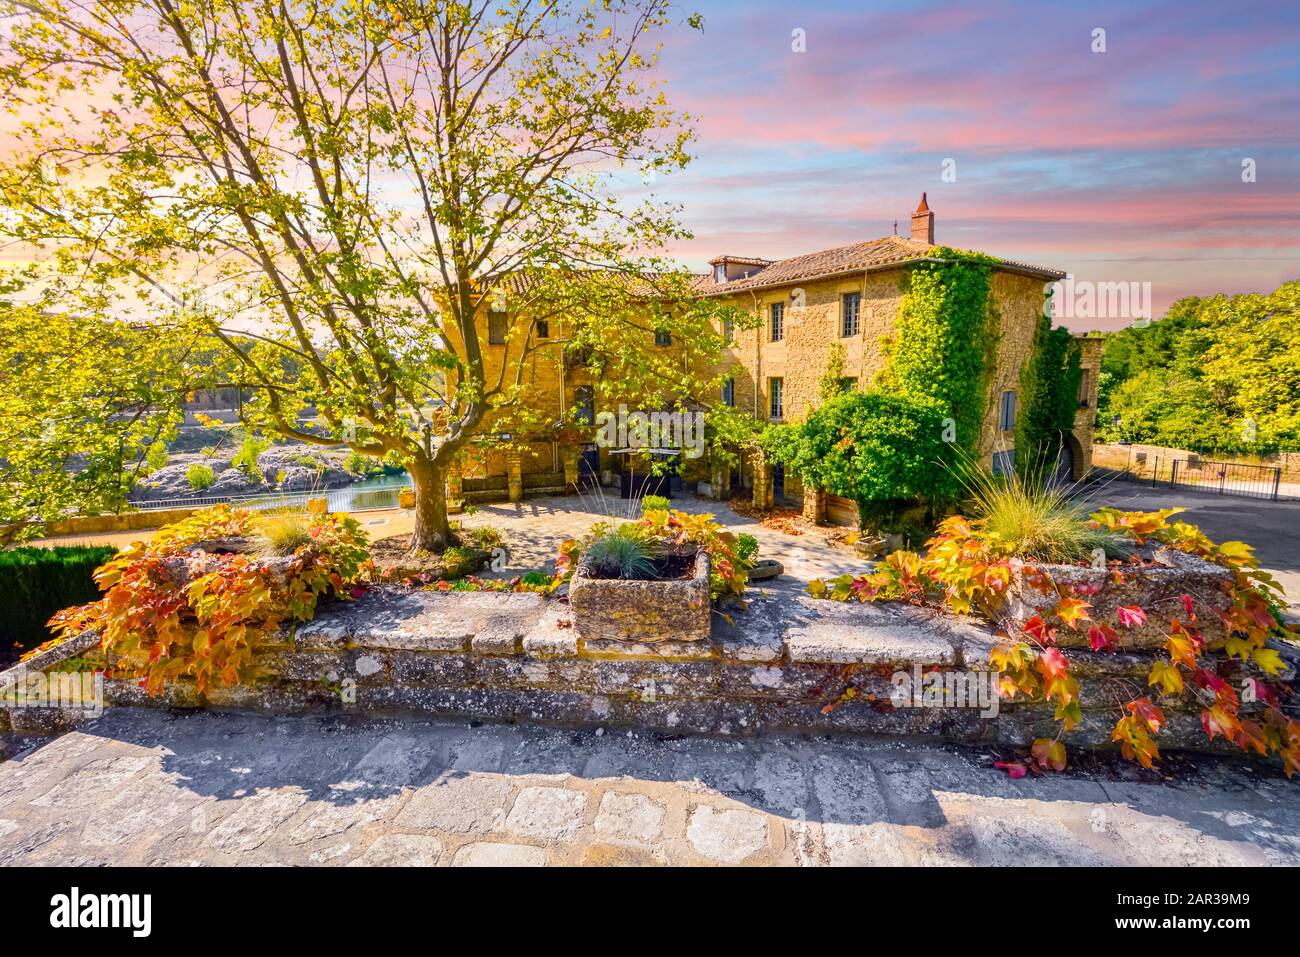 A colorful sky and sunset over a historic stucco mansion or country home along a river in the Provence area of Southern France at Autumn. Stock Photo